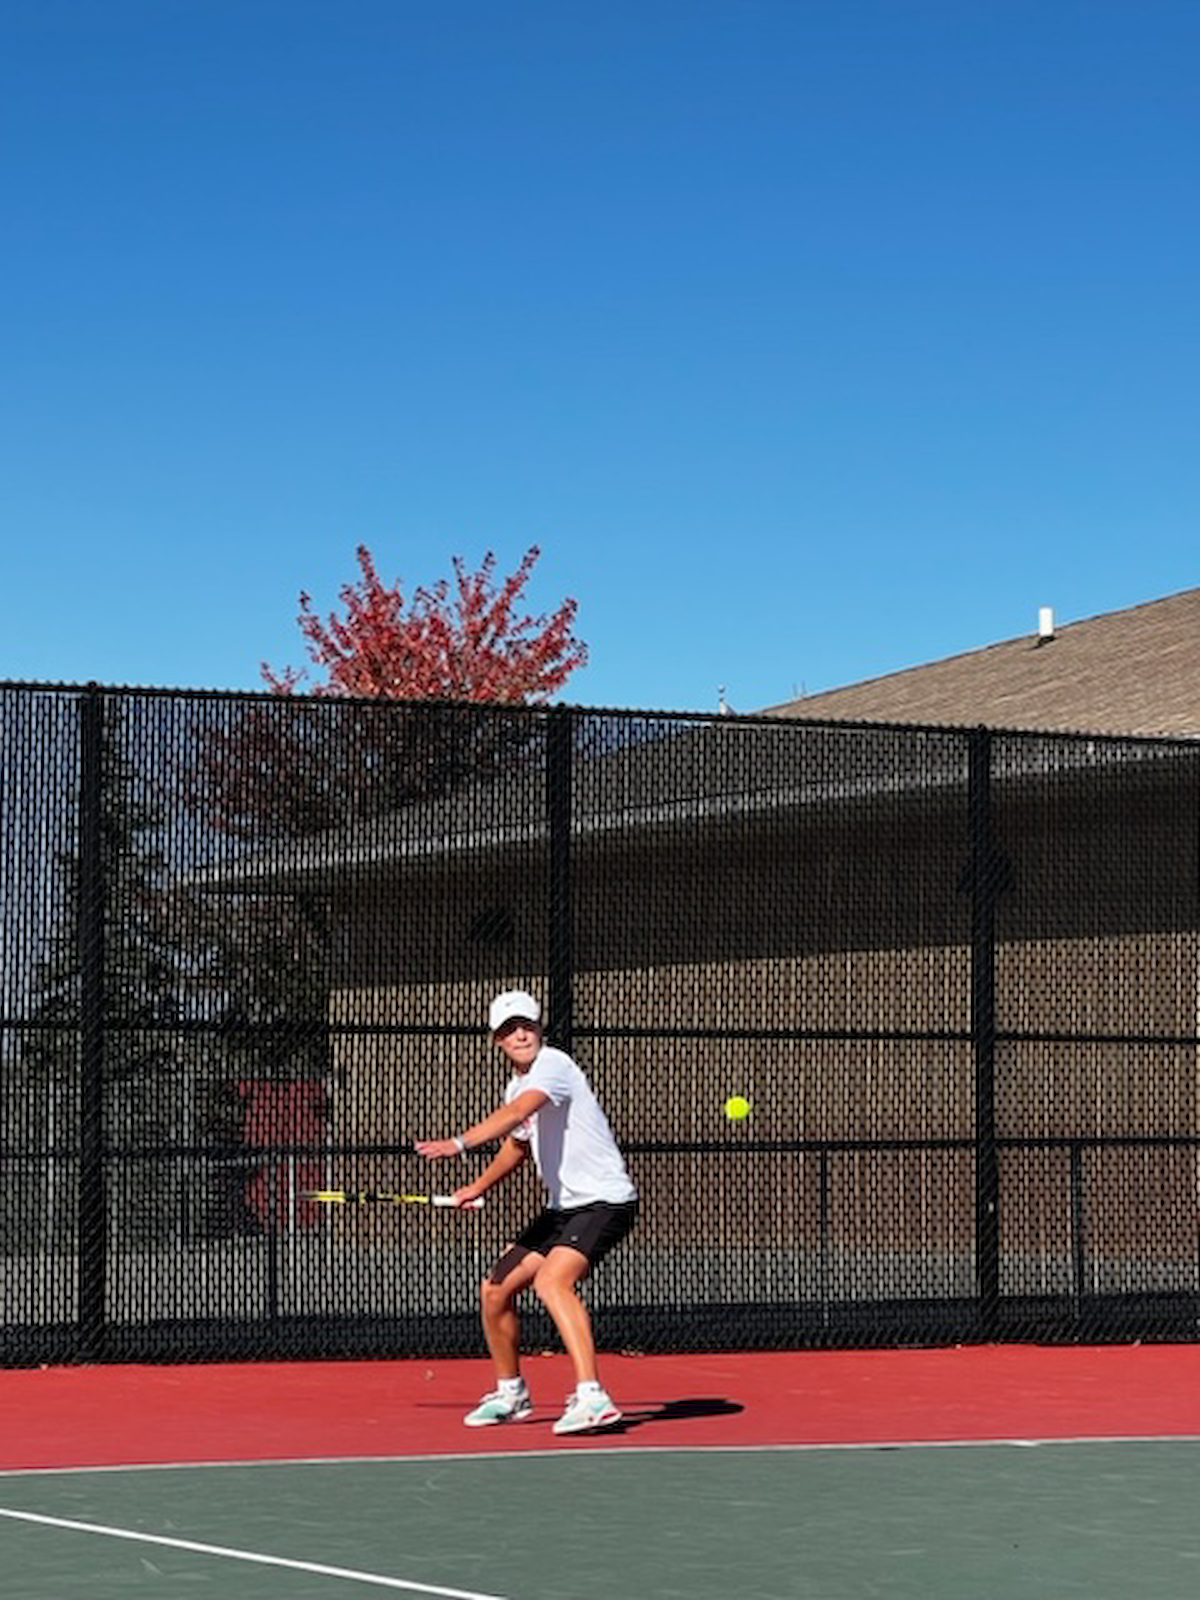 Haynes competes in tennis tourney cover photo